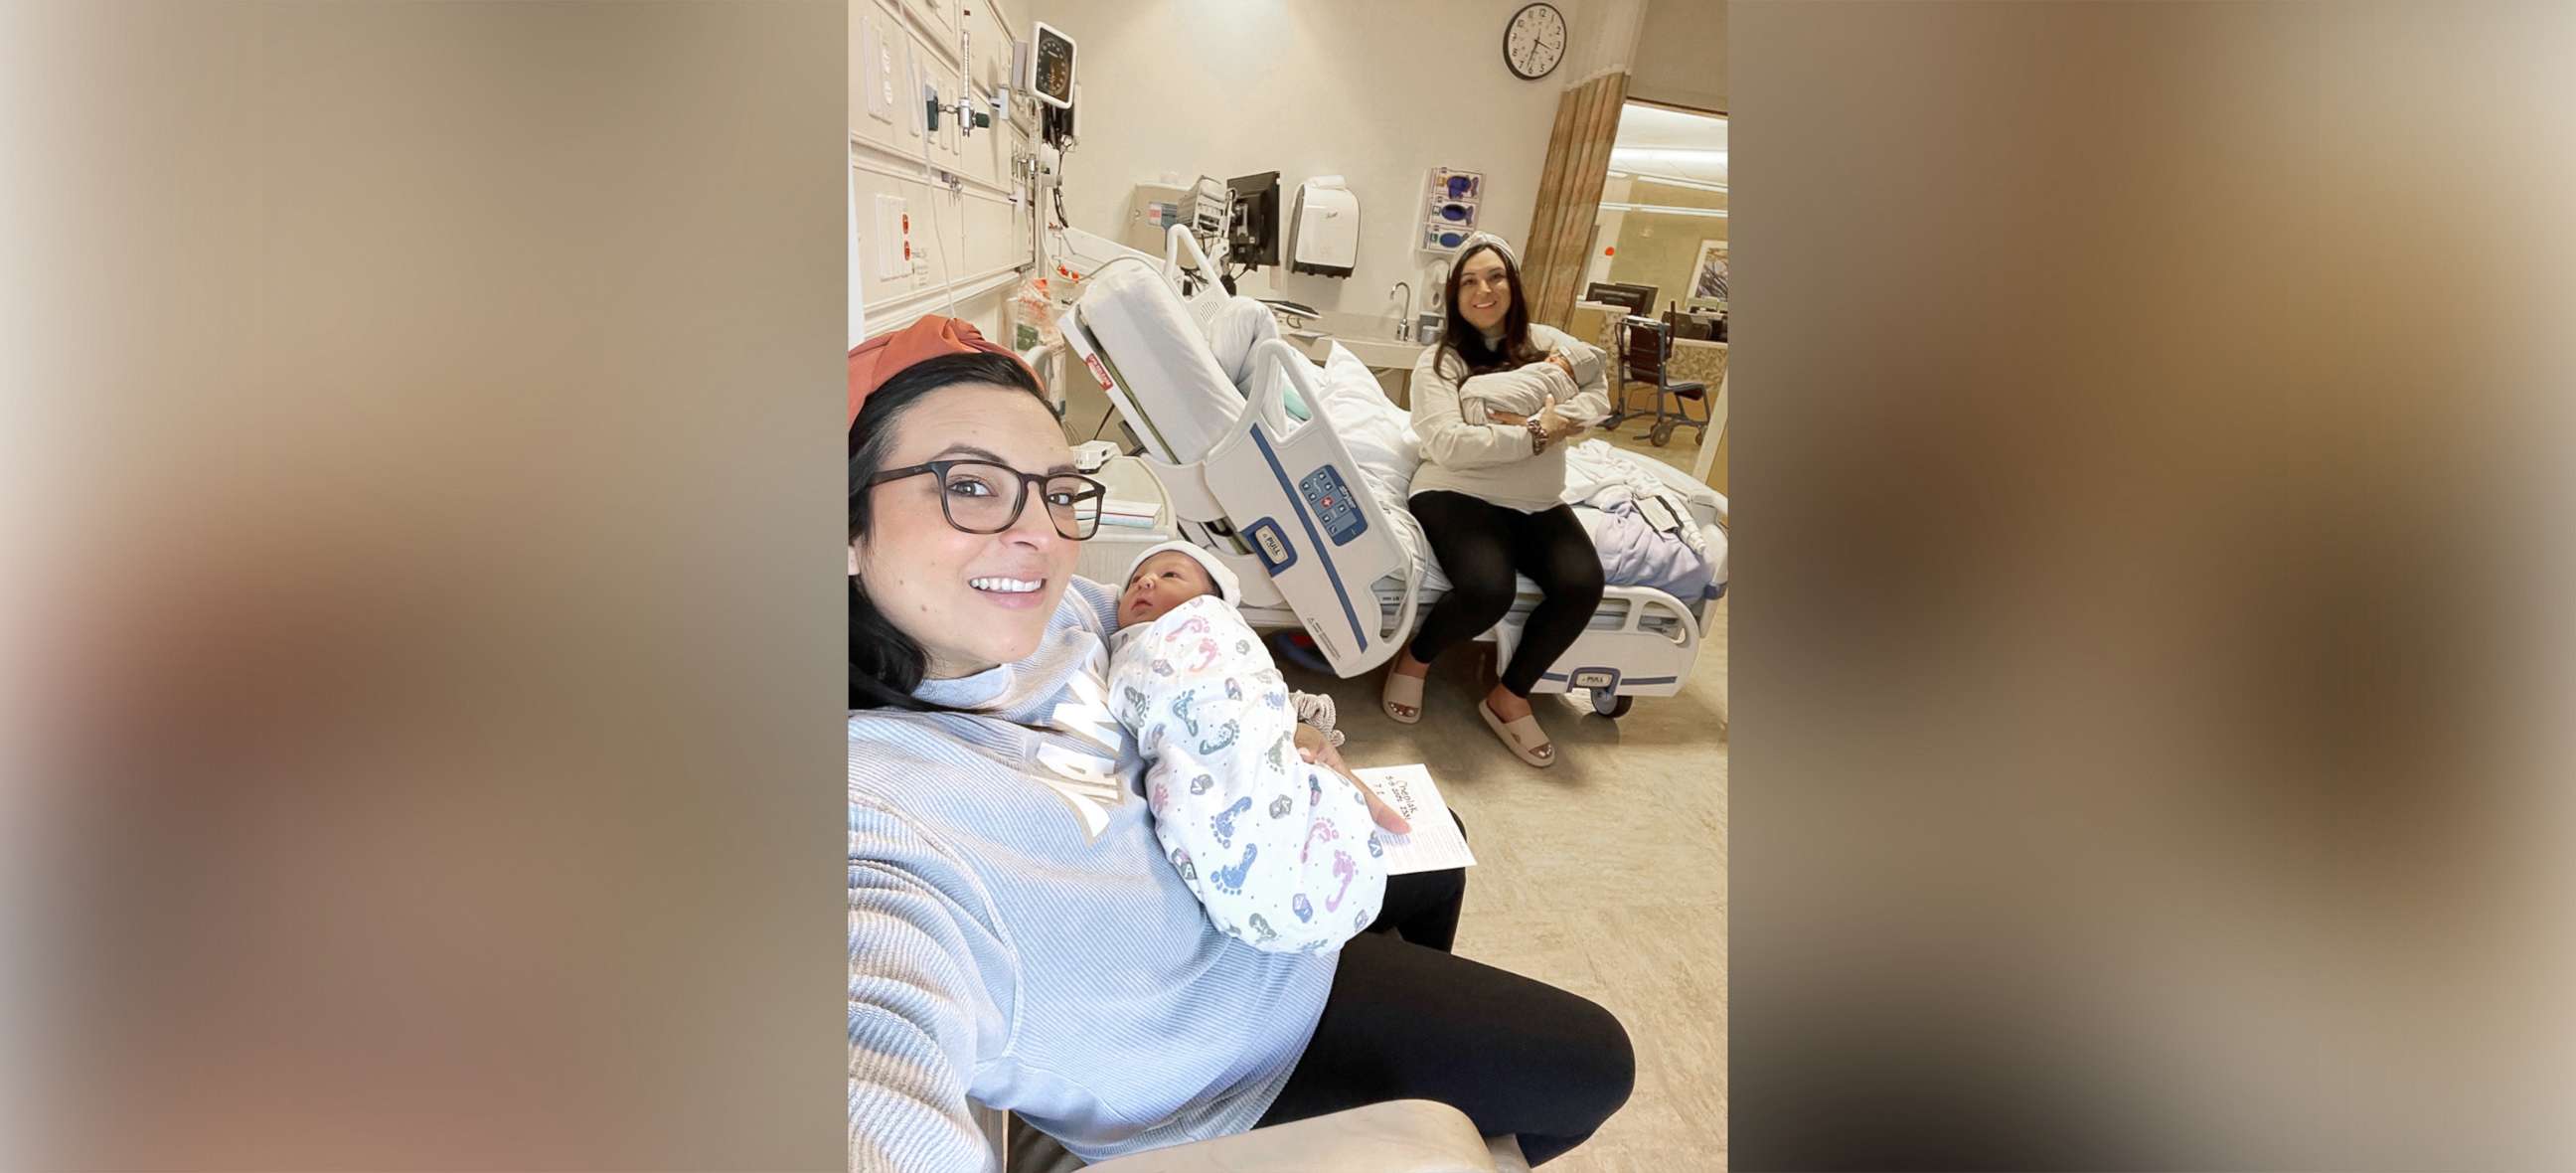 PHOTO: Twin sisters Jill Justiniani and Erin Cheplak hold their sons, who were born on the same day in the same hospital in California.